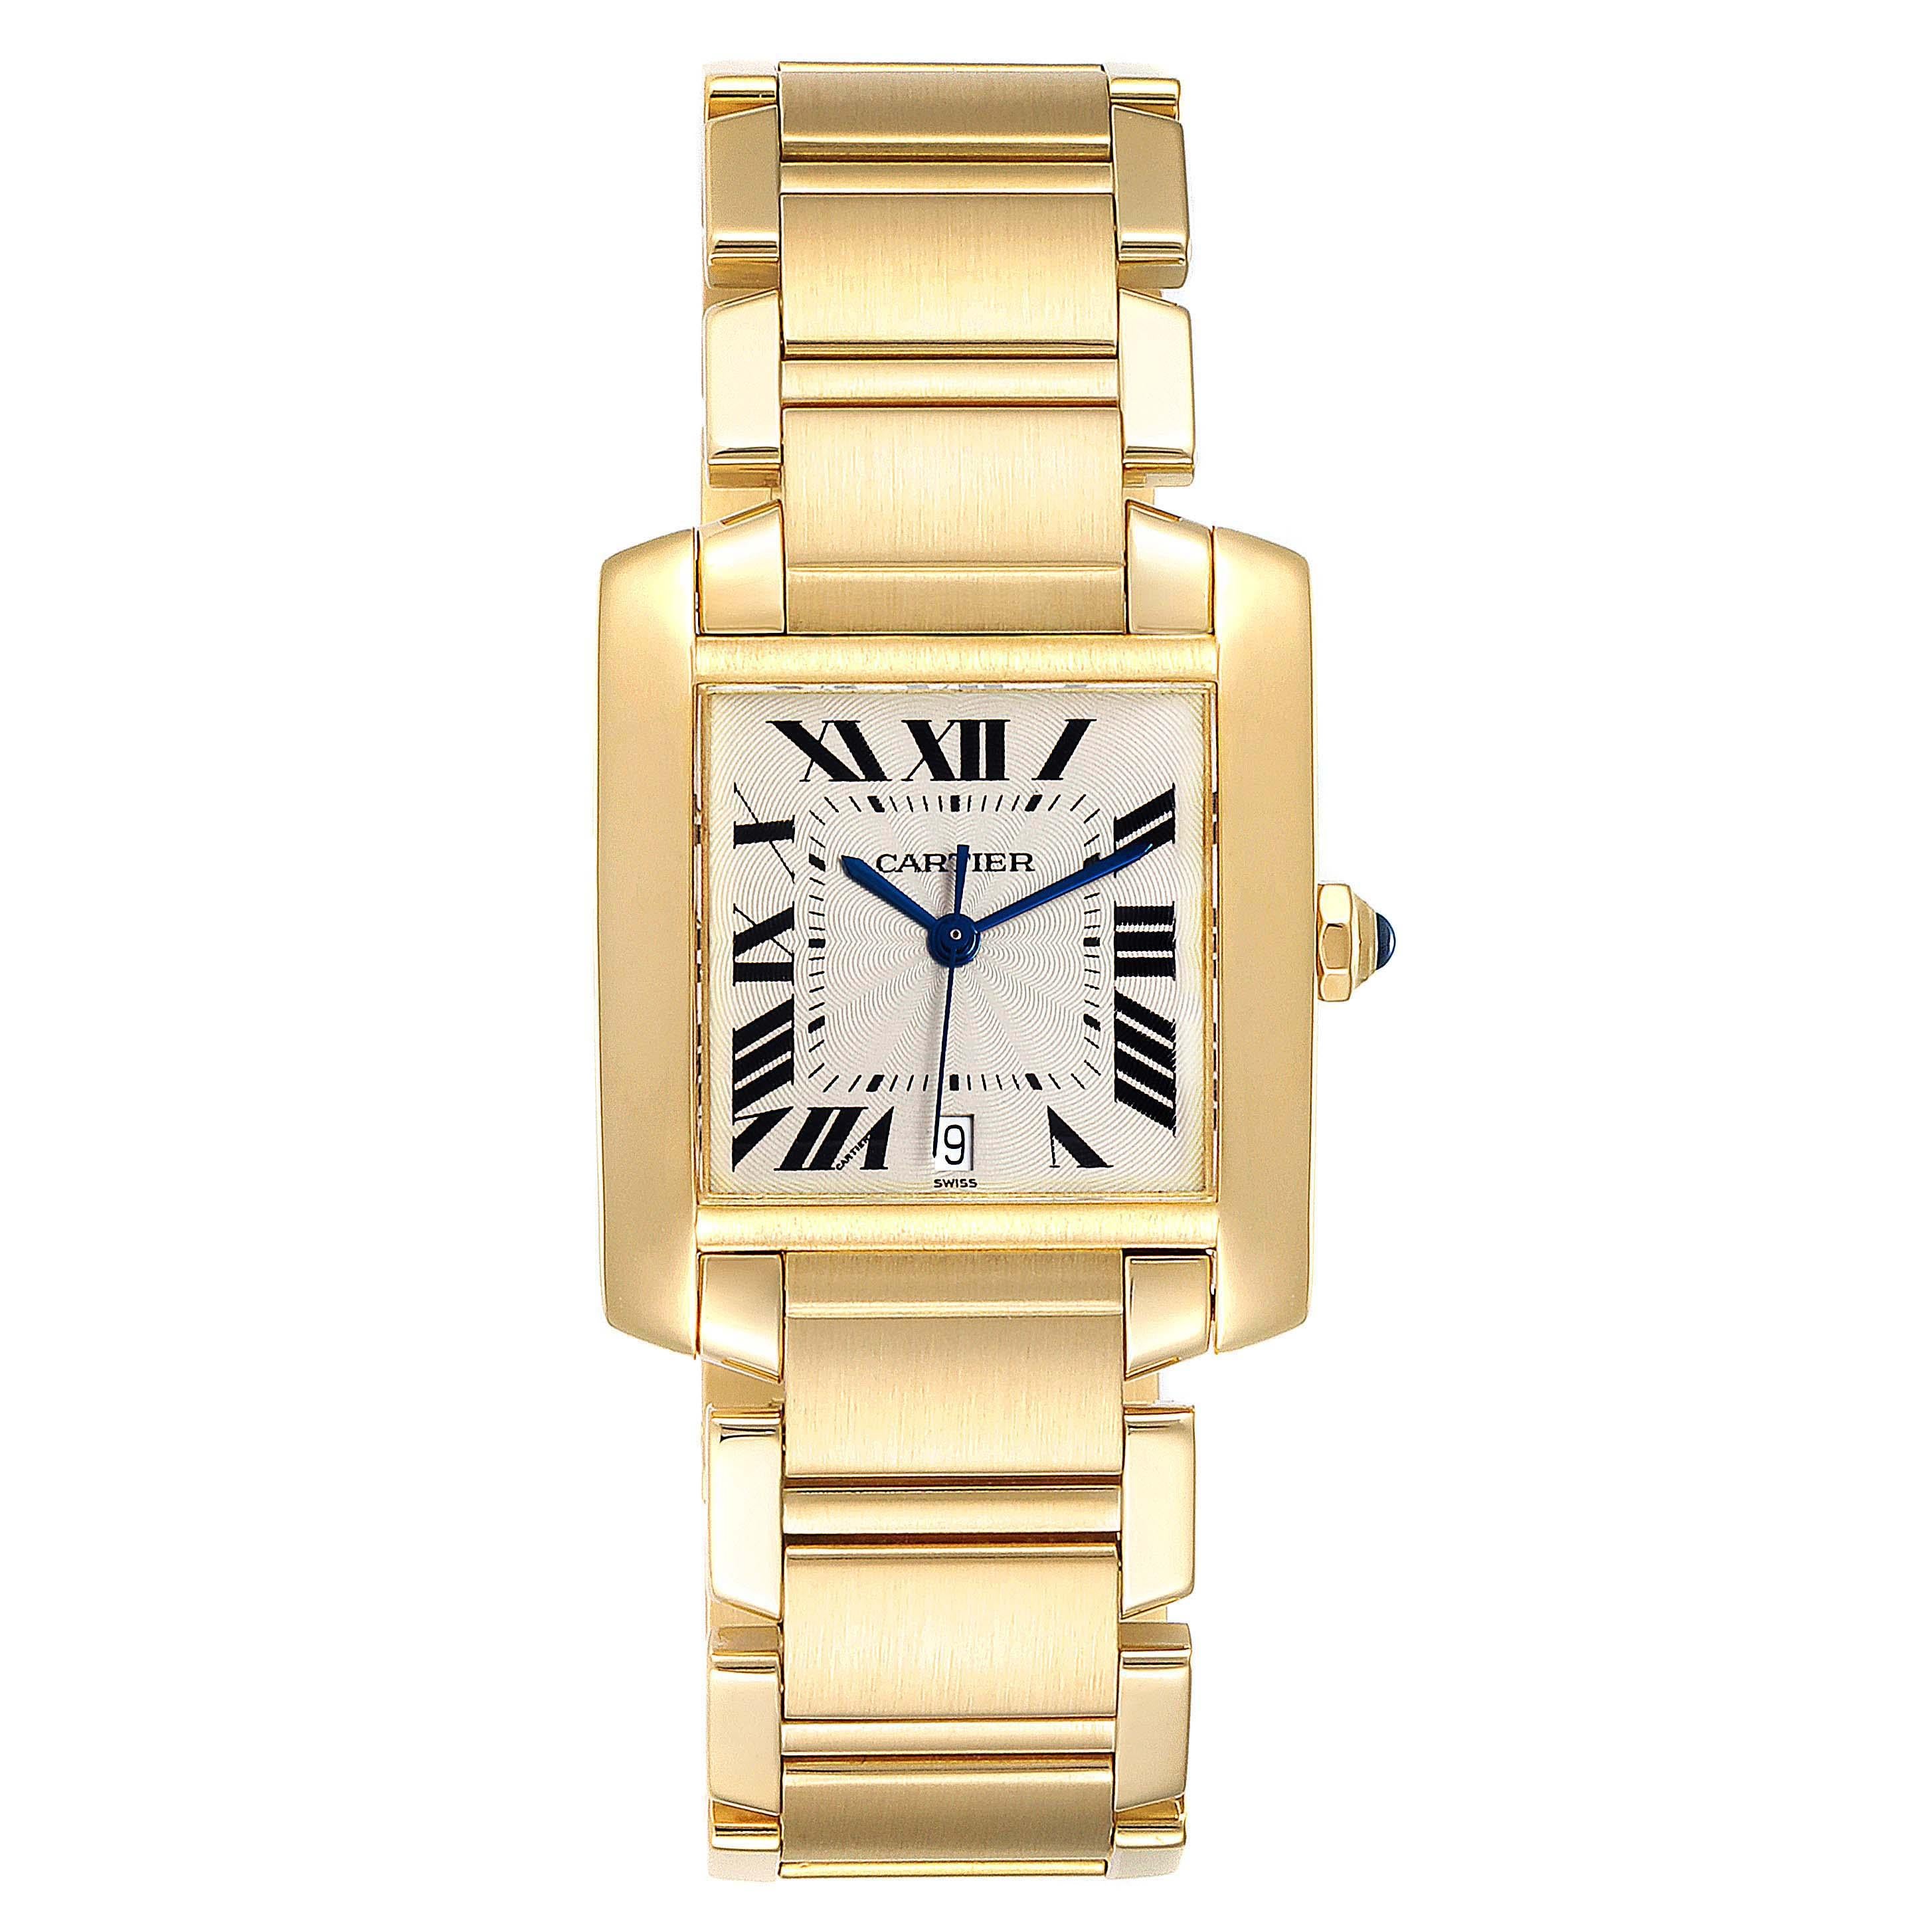 Cartier Tank Francaise Large Yellow Gold Automatic Mens Watch W50001R2. Automatic self-winding movement. Rectangular 28.0 x 32.0 mm case. Octagonal 18K yellow gold crown set with a blue sapphire cabochon. . Scratch resistant sapphire crystal. Silver